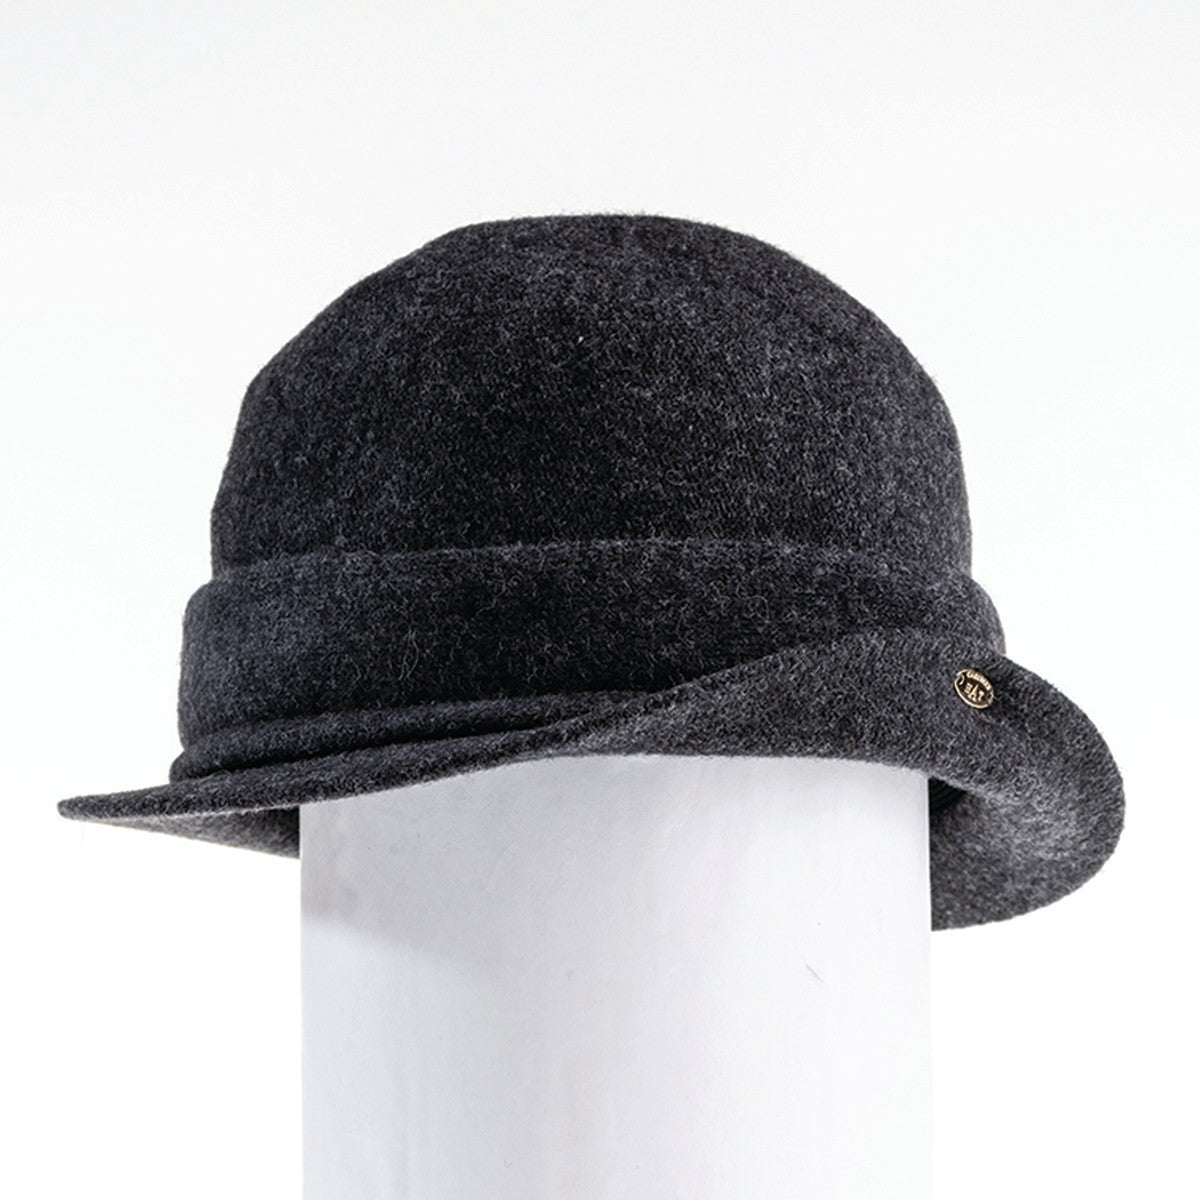 OKENA - ORMOS CLOCHE HAT WITH SIDE RISE